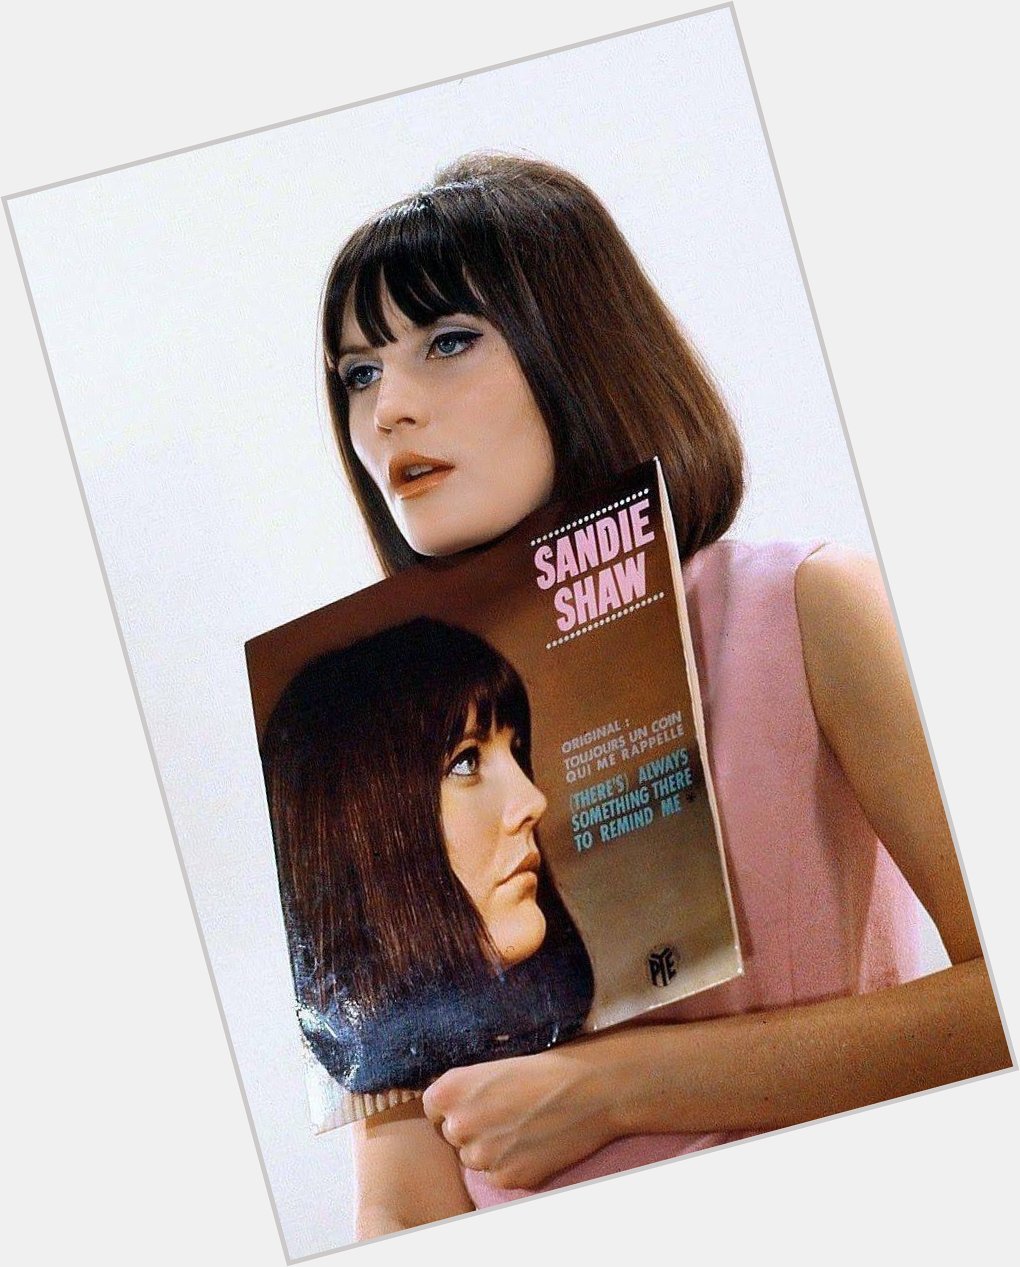 Happy birthday to English singer, songwriter, stage actress and psychotherapist Sandie Shaw, born February 26, 1947. 